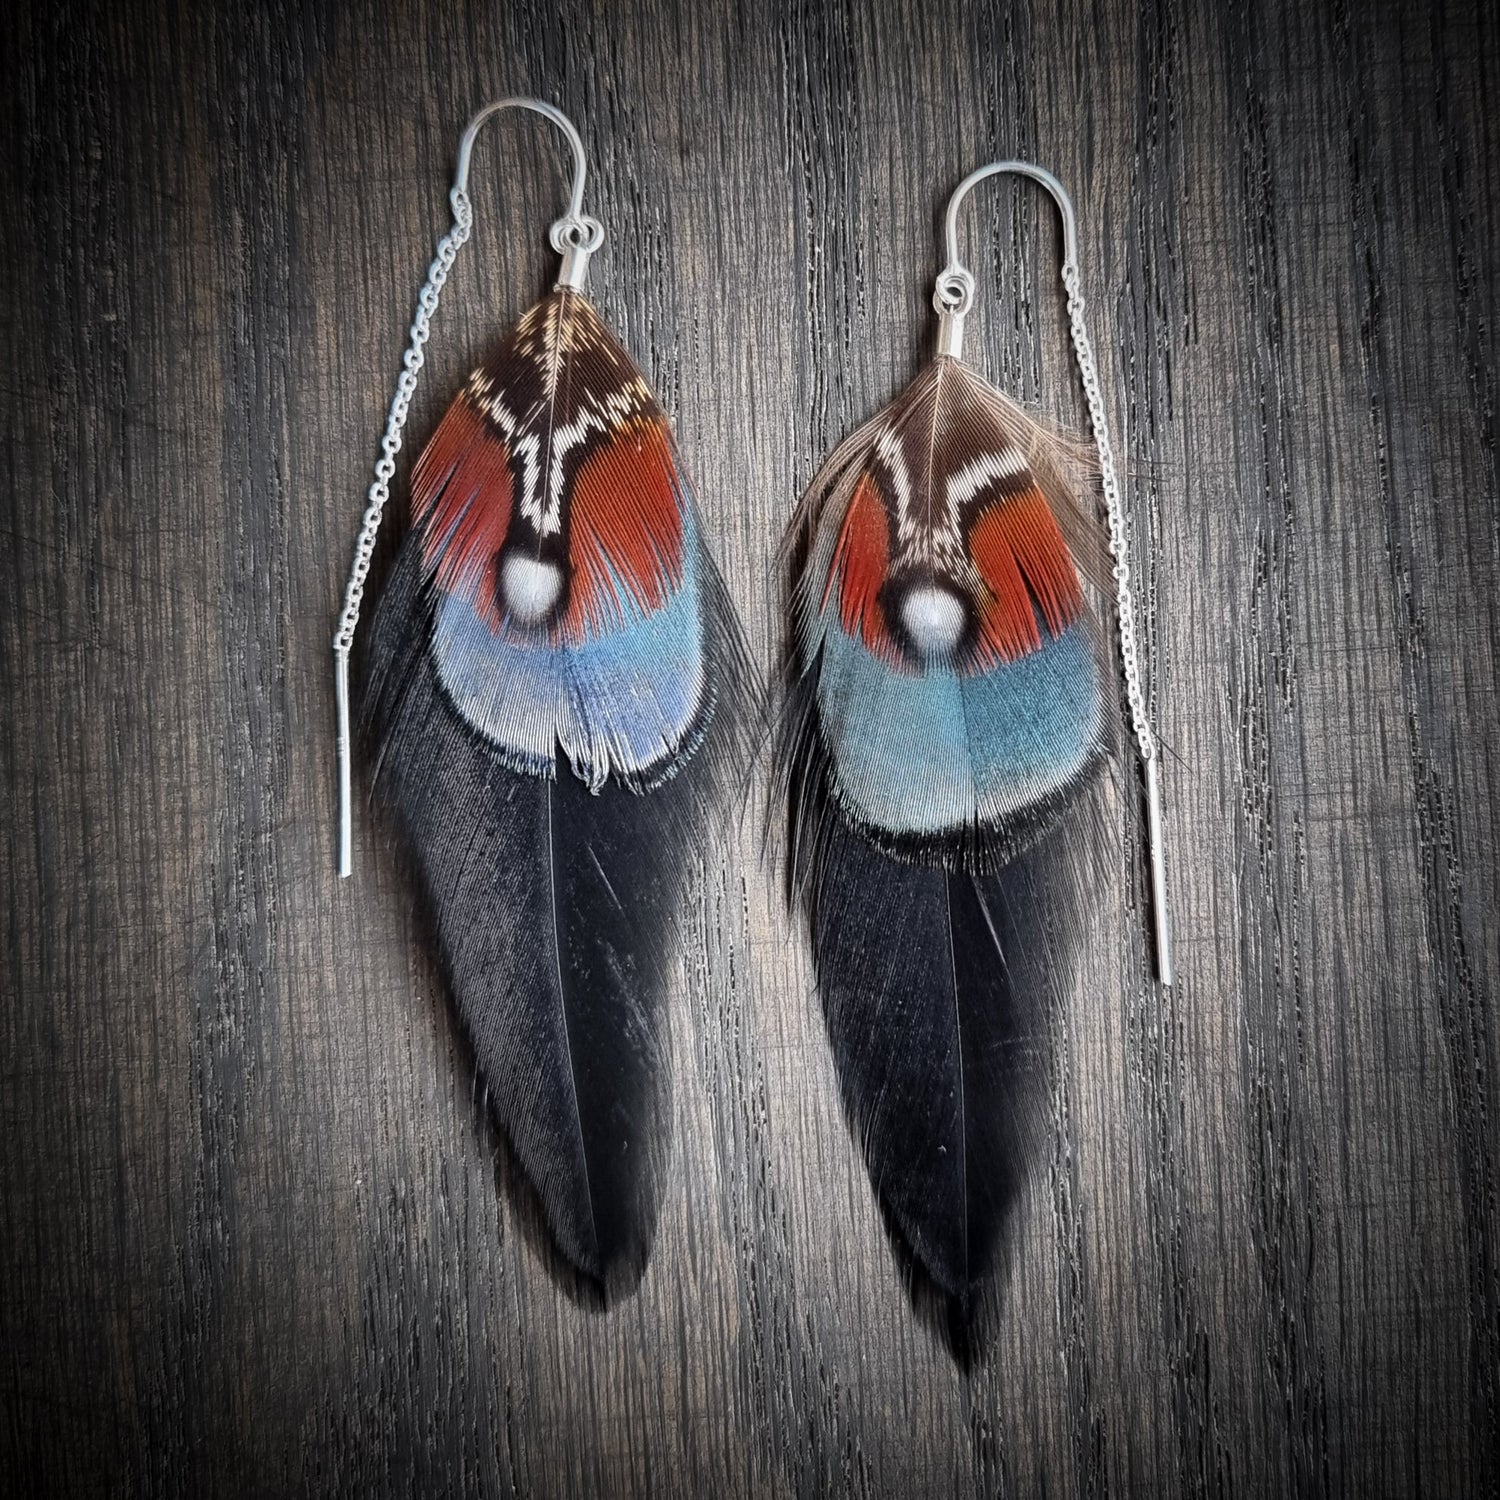 Emily Eliza Arlotte Handcrafted Fine Jewellery - Handmade Australian Tasmanian Natural Cruelty Free Ethical Eco Designer Green Brown Patterned Pheasant Bird Feather Earrings Sterling Silver Threads Chains Dainty Boho Bohemian Gypsy Witchy Style Fashion